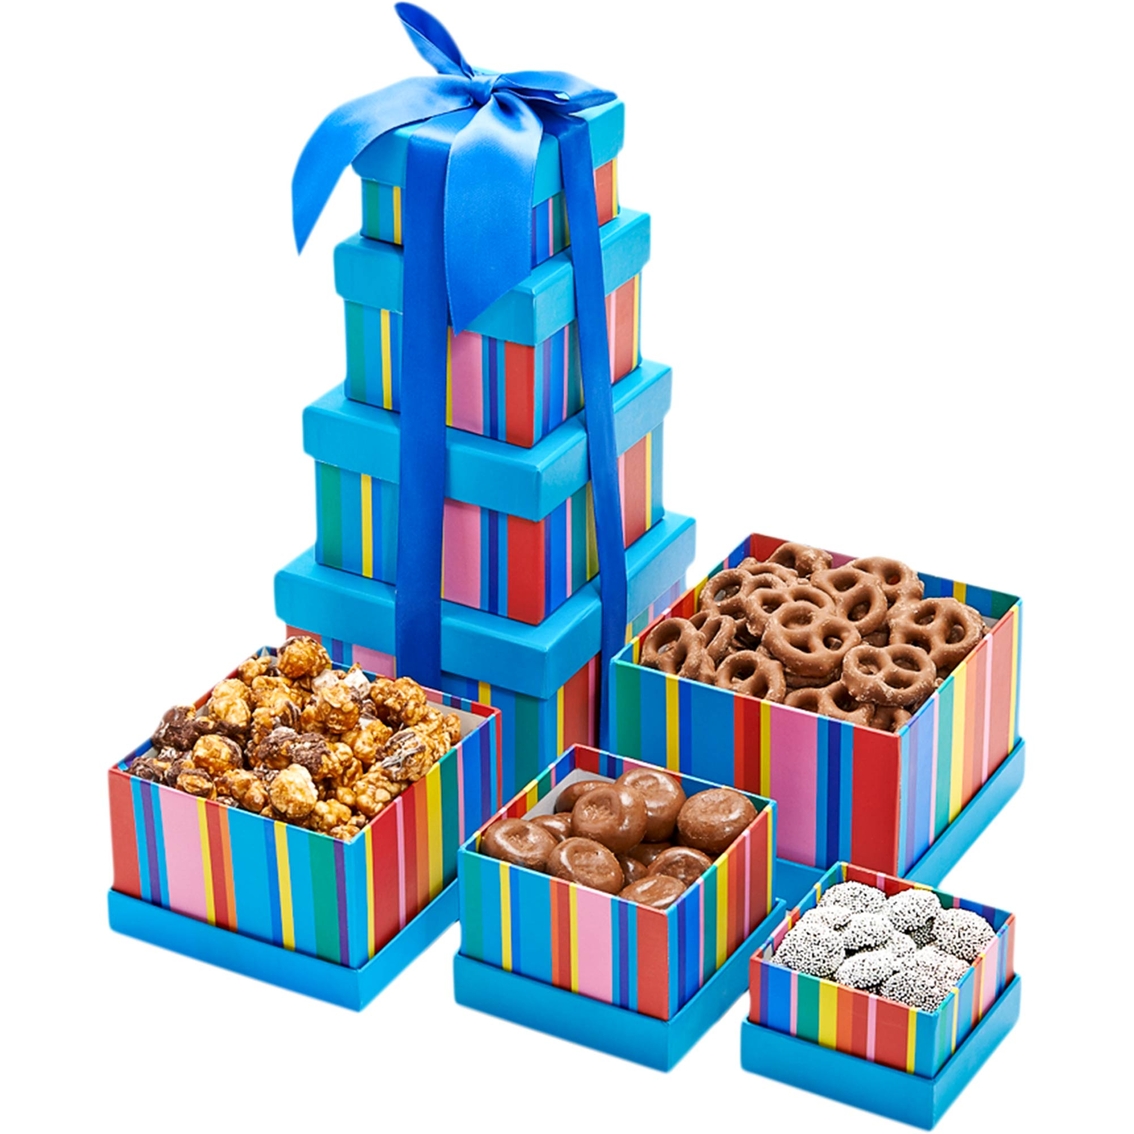 Dylan's Candy Bar Sweet Treat Chocolate Tower - Image 3 of 4